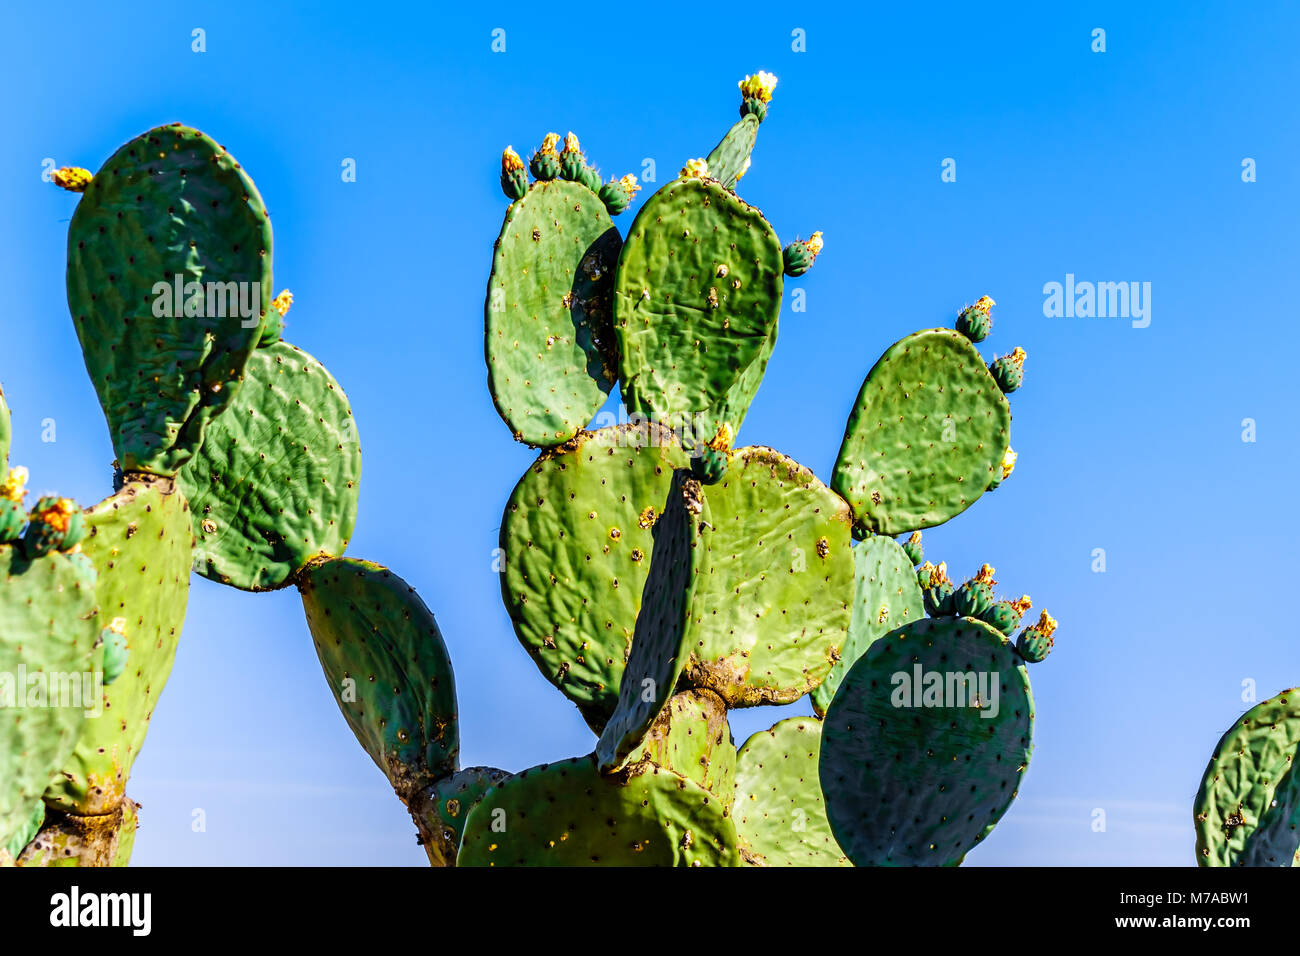 Old Prickly Pear Cactus in the semi desert Karoo Region of South Africa Stock Photo